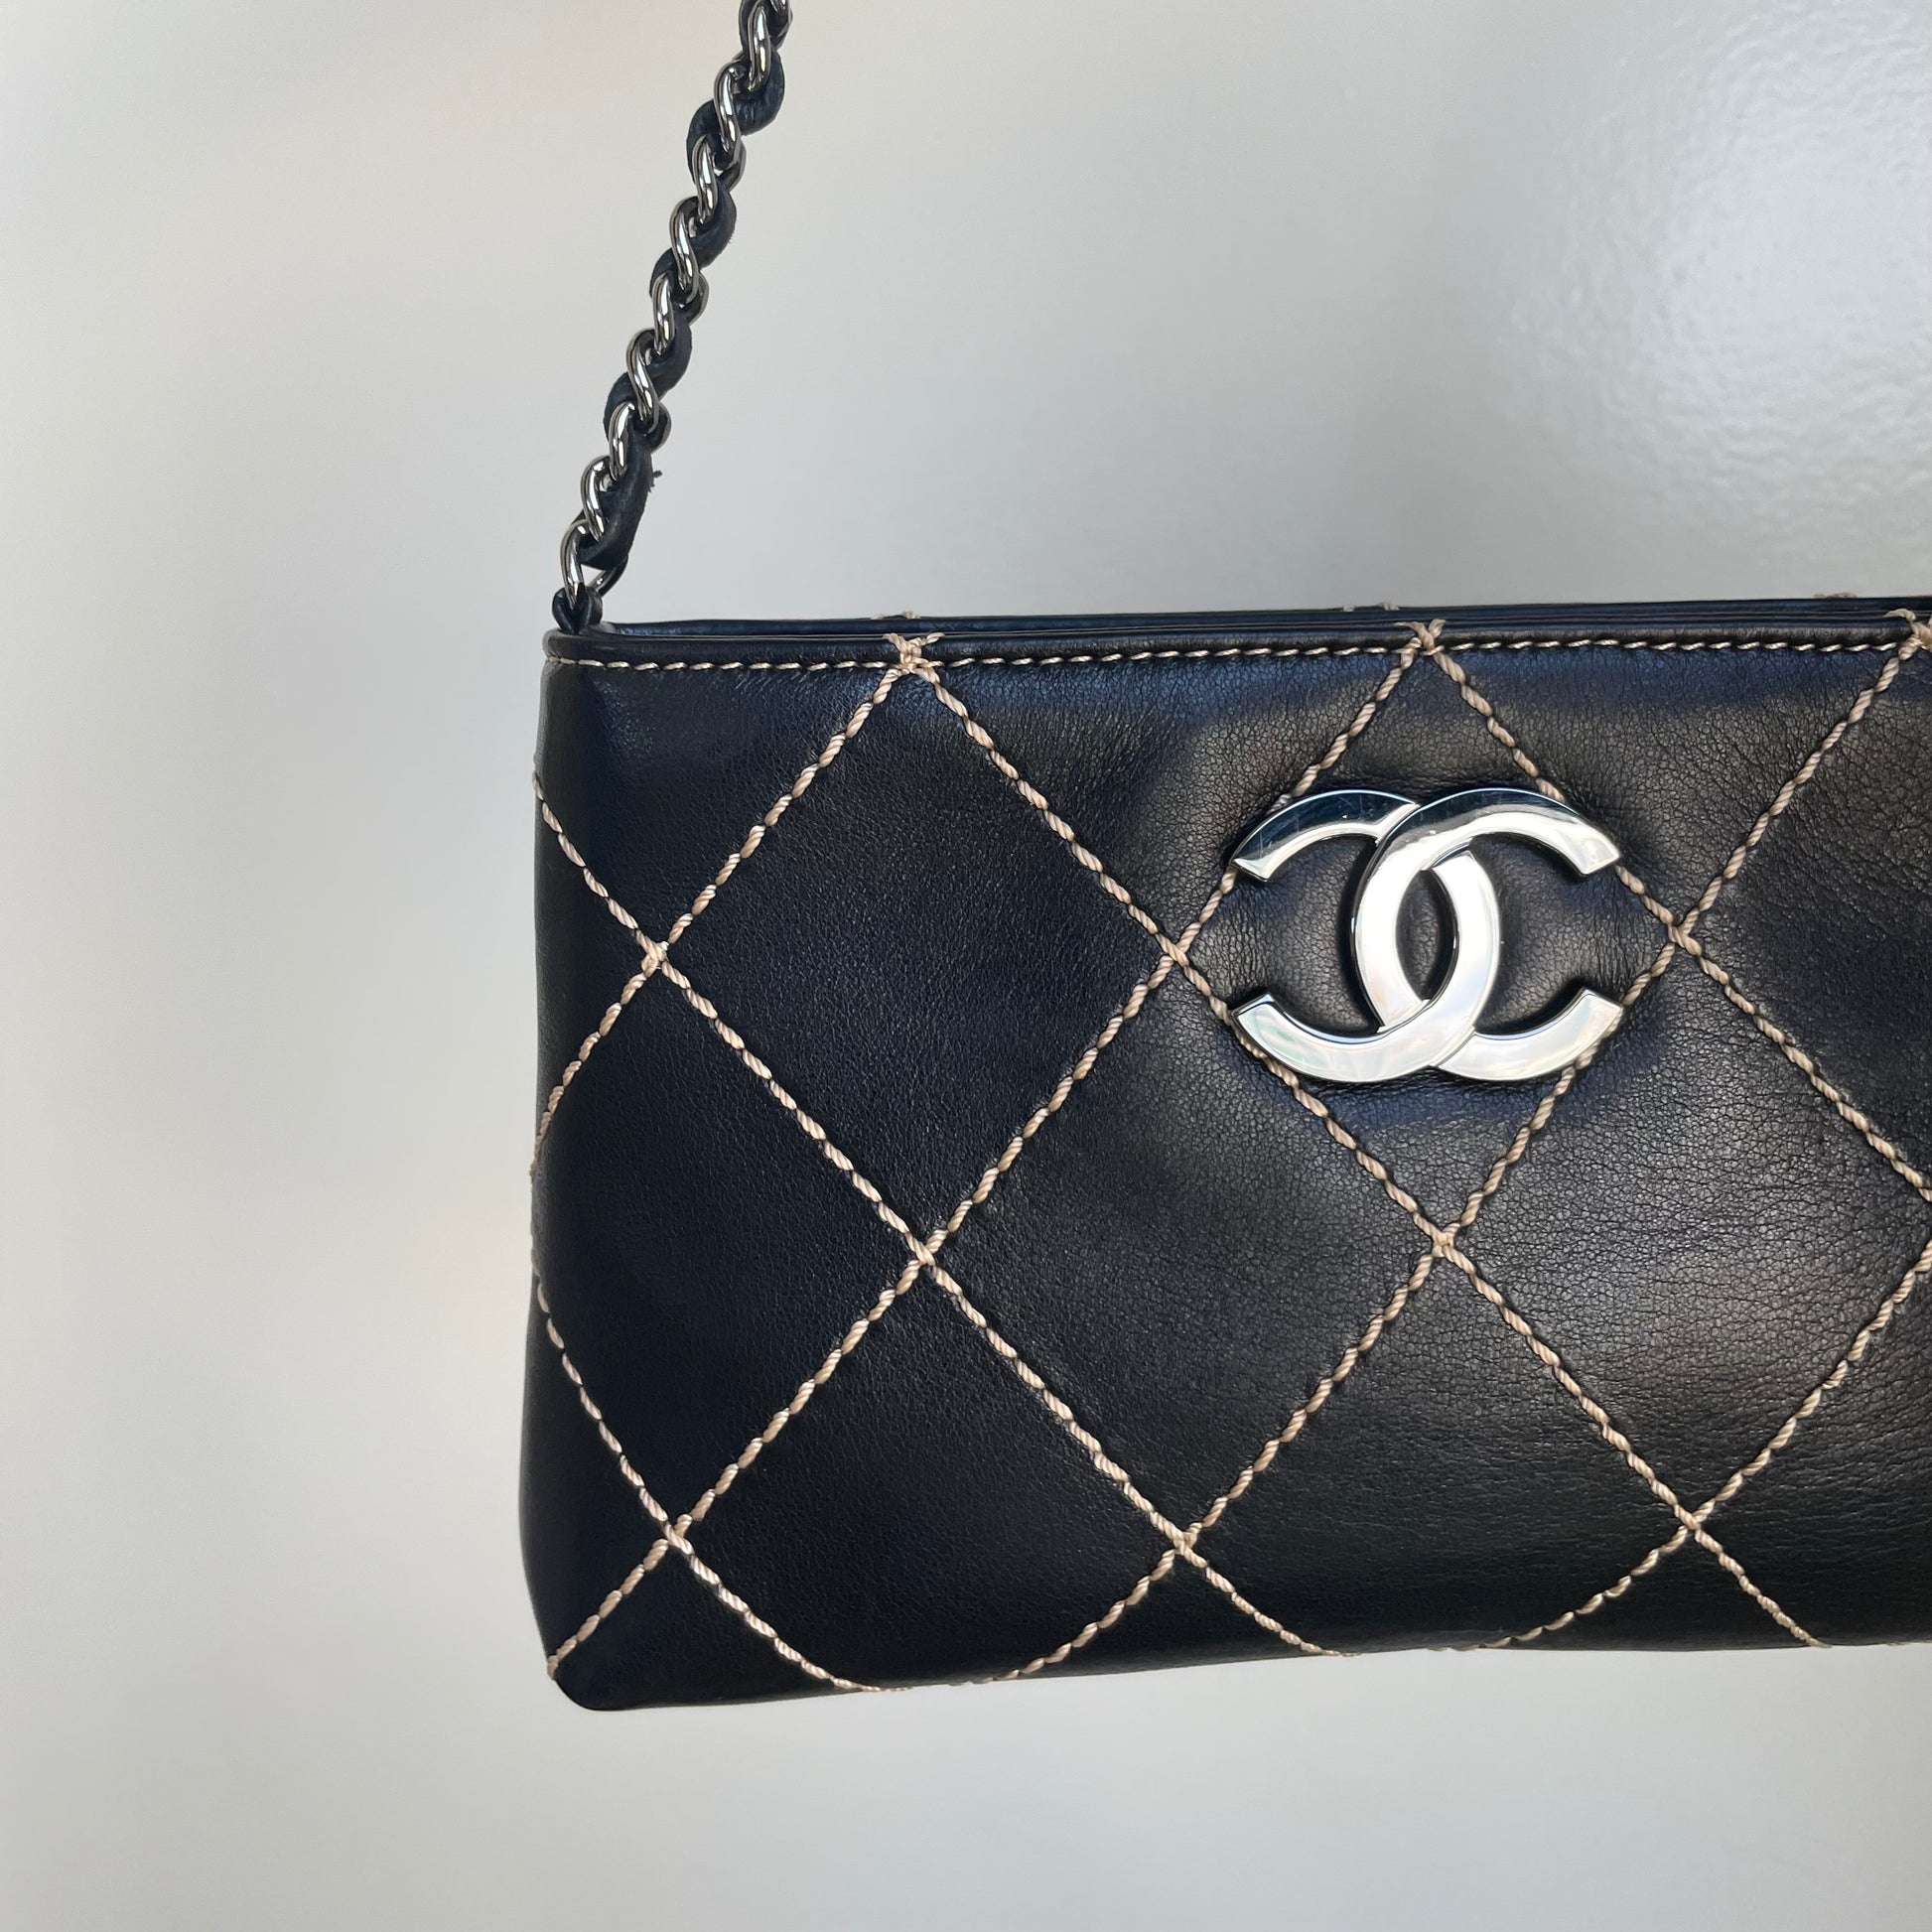 Shop authentic Chanel Quilted Surpique Bag at revogue for just USD